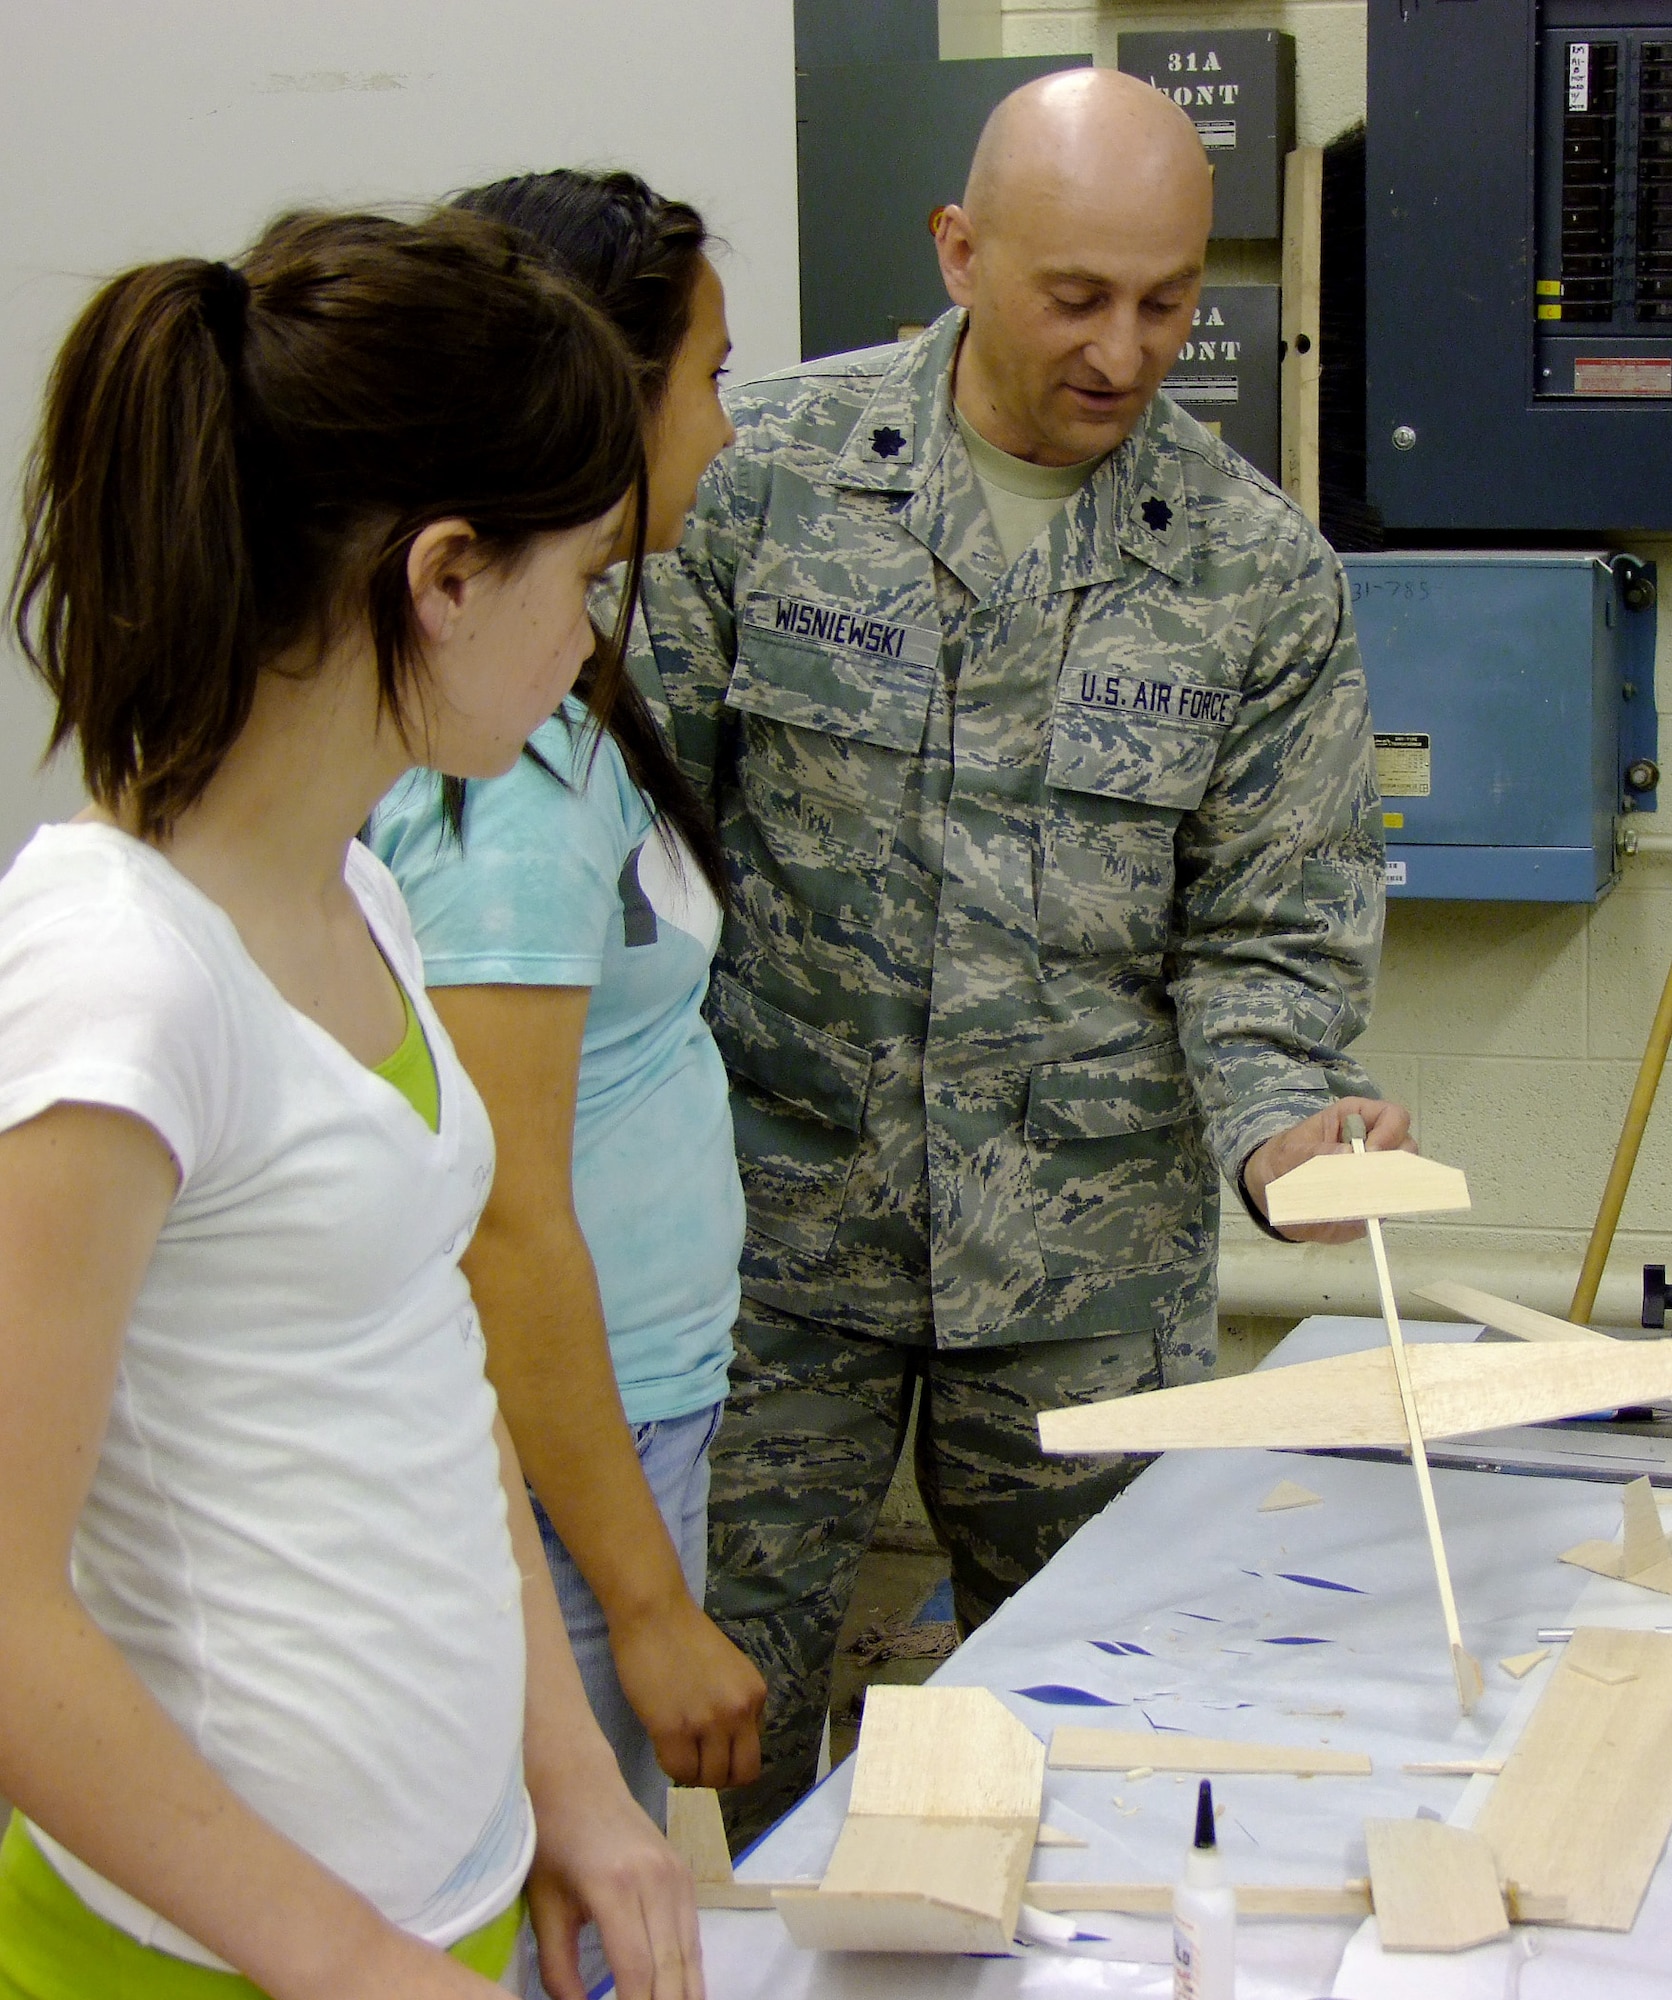 Lt. Col. Charles Wisniewski works with two teens on model gliders June 7, 2011, at the Air Force Academy, Colo. (U.S. Air Force photo/Leslie Finstein)